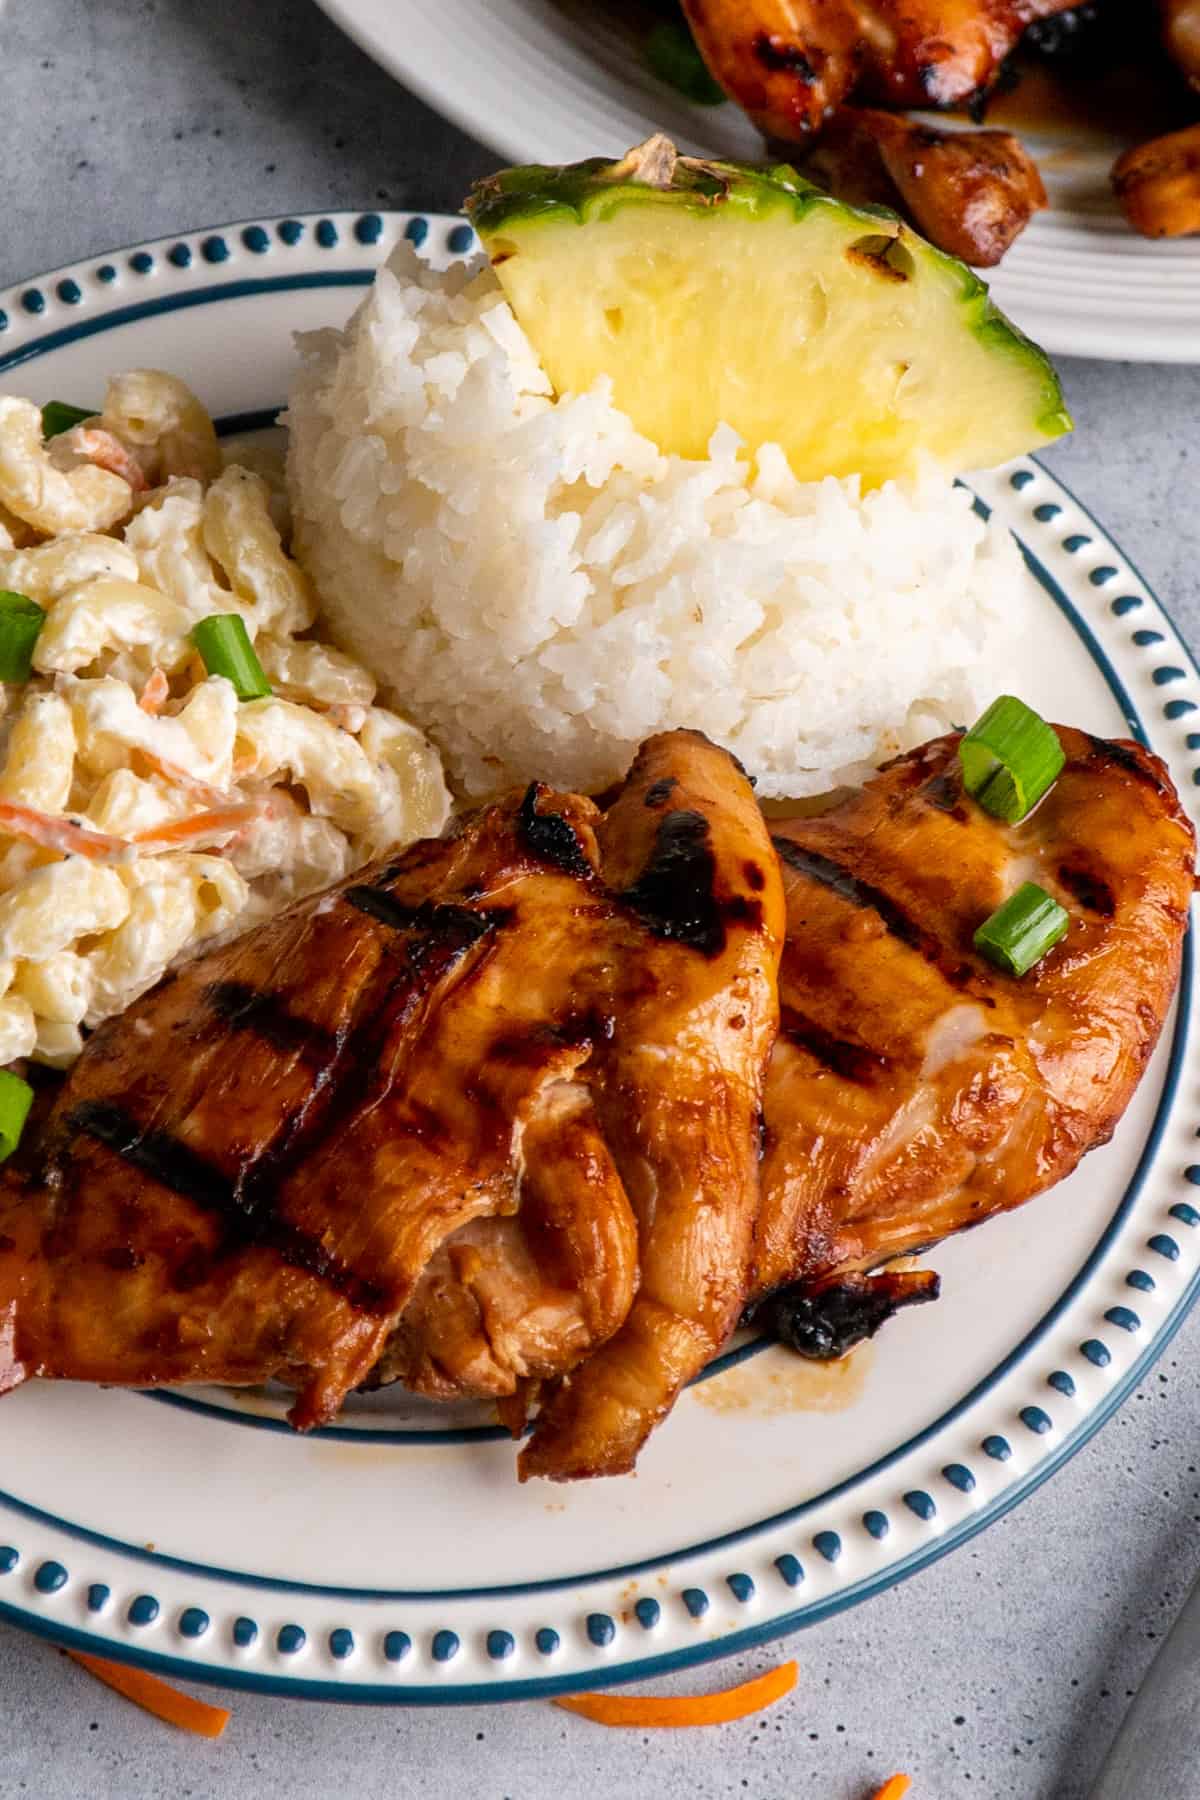 Marinated chicken thighs on a plate with macaroni salad and rice.